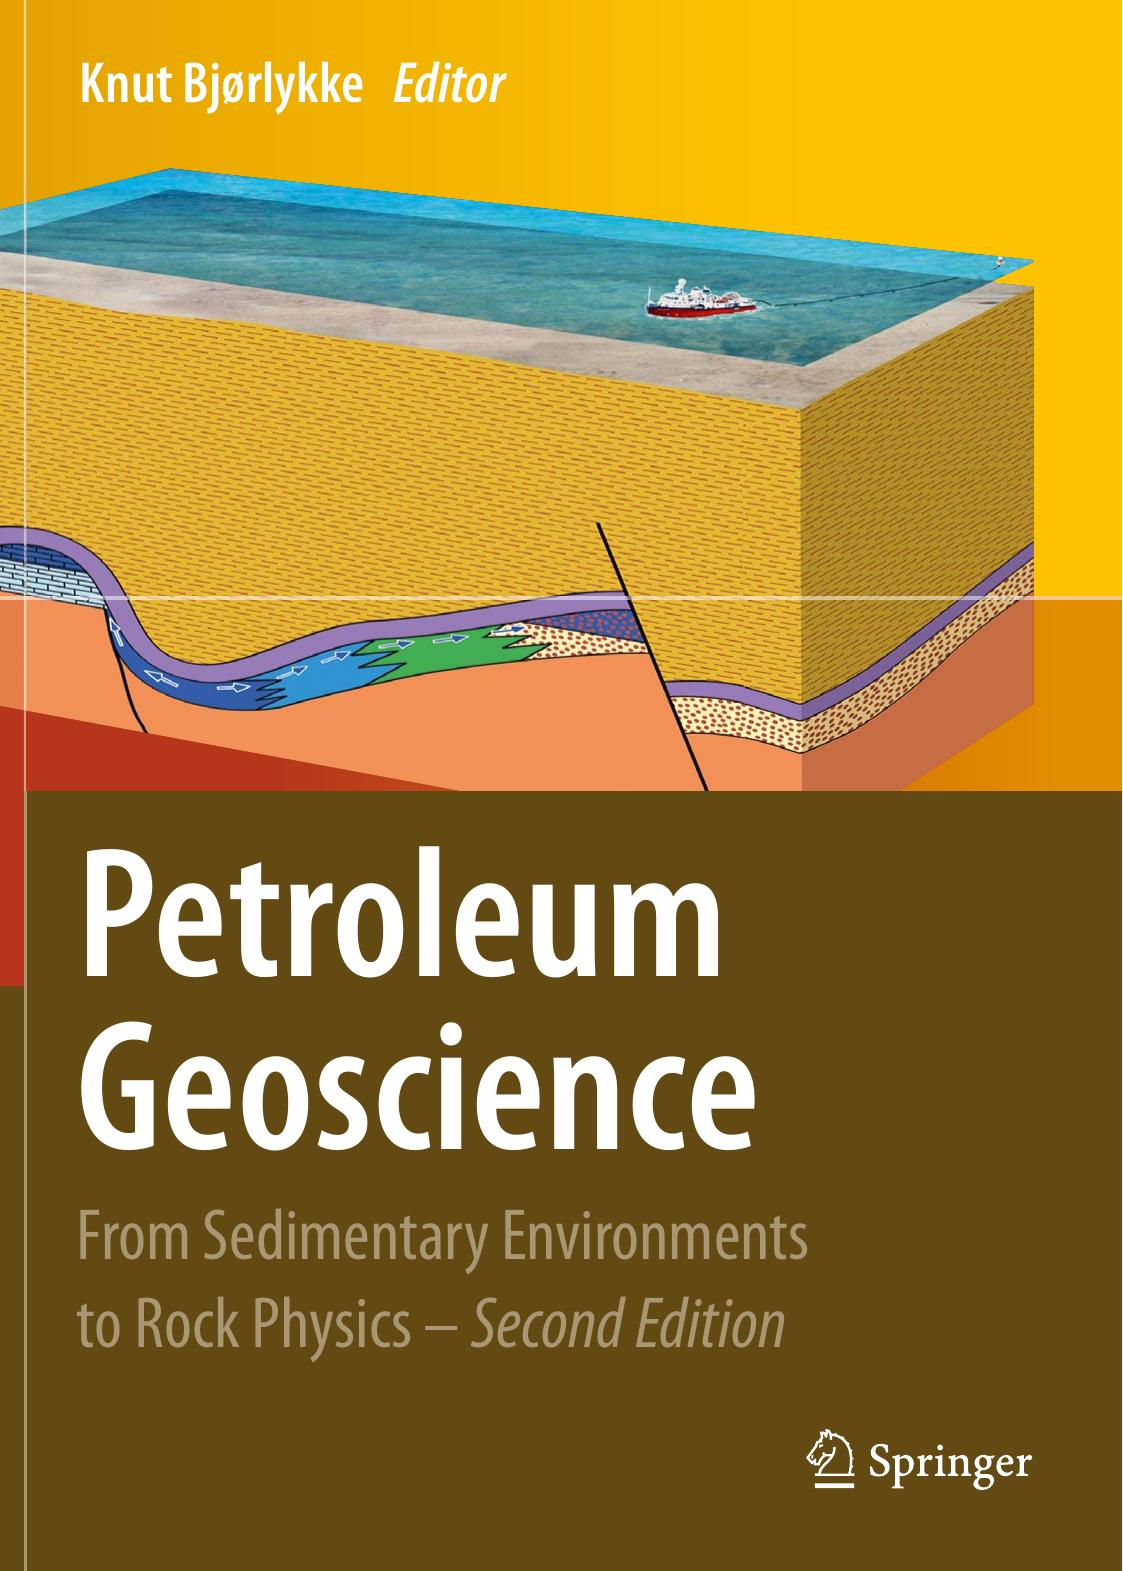 Petroleum Geoscience From Sedimentary Environments to Rock Physics 2015